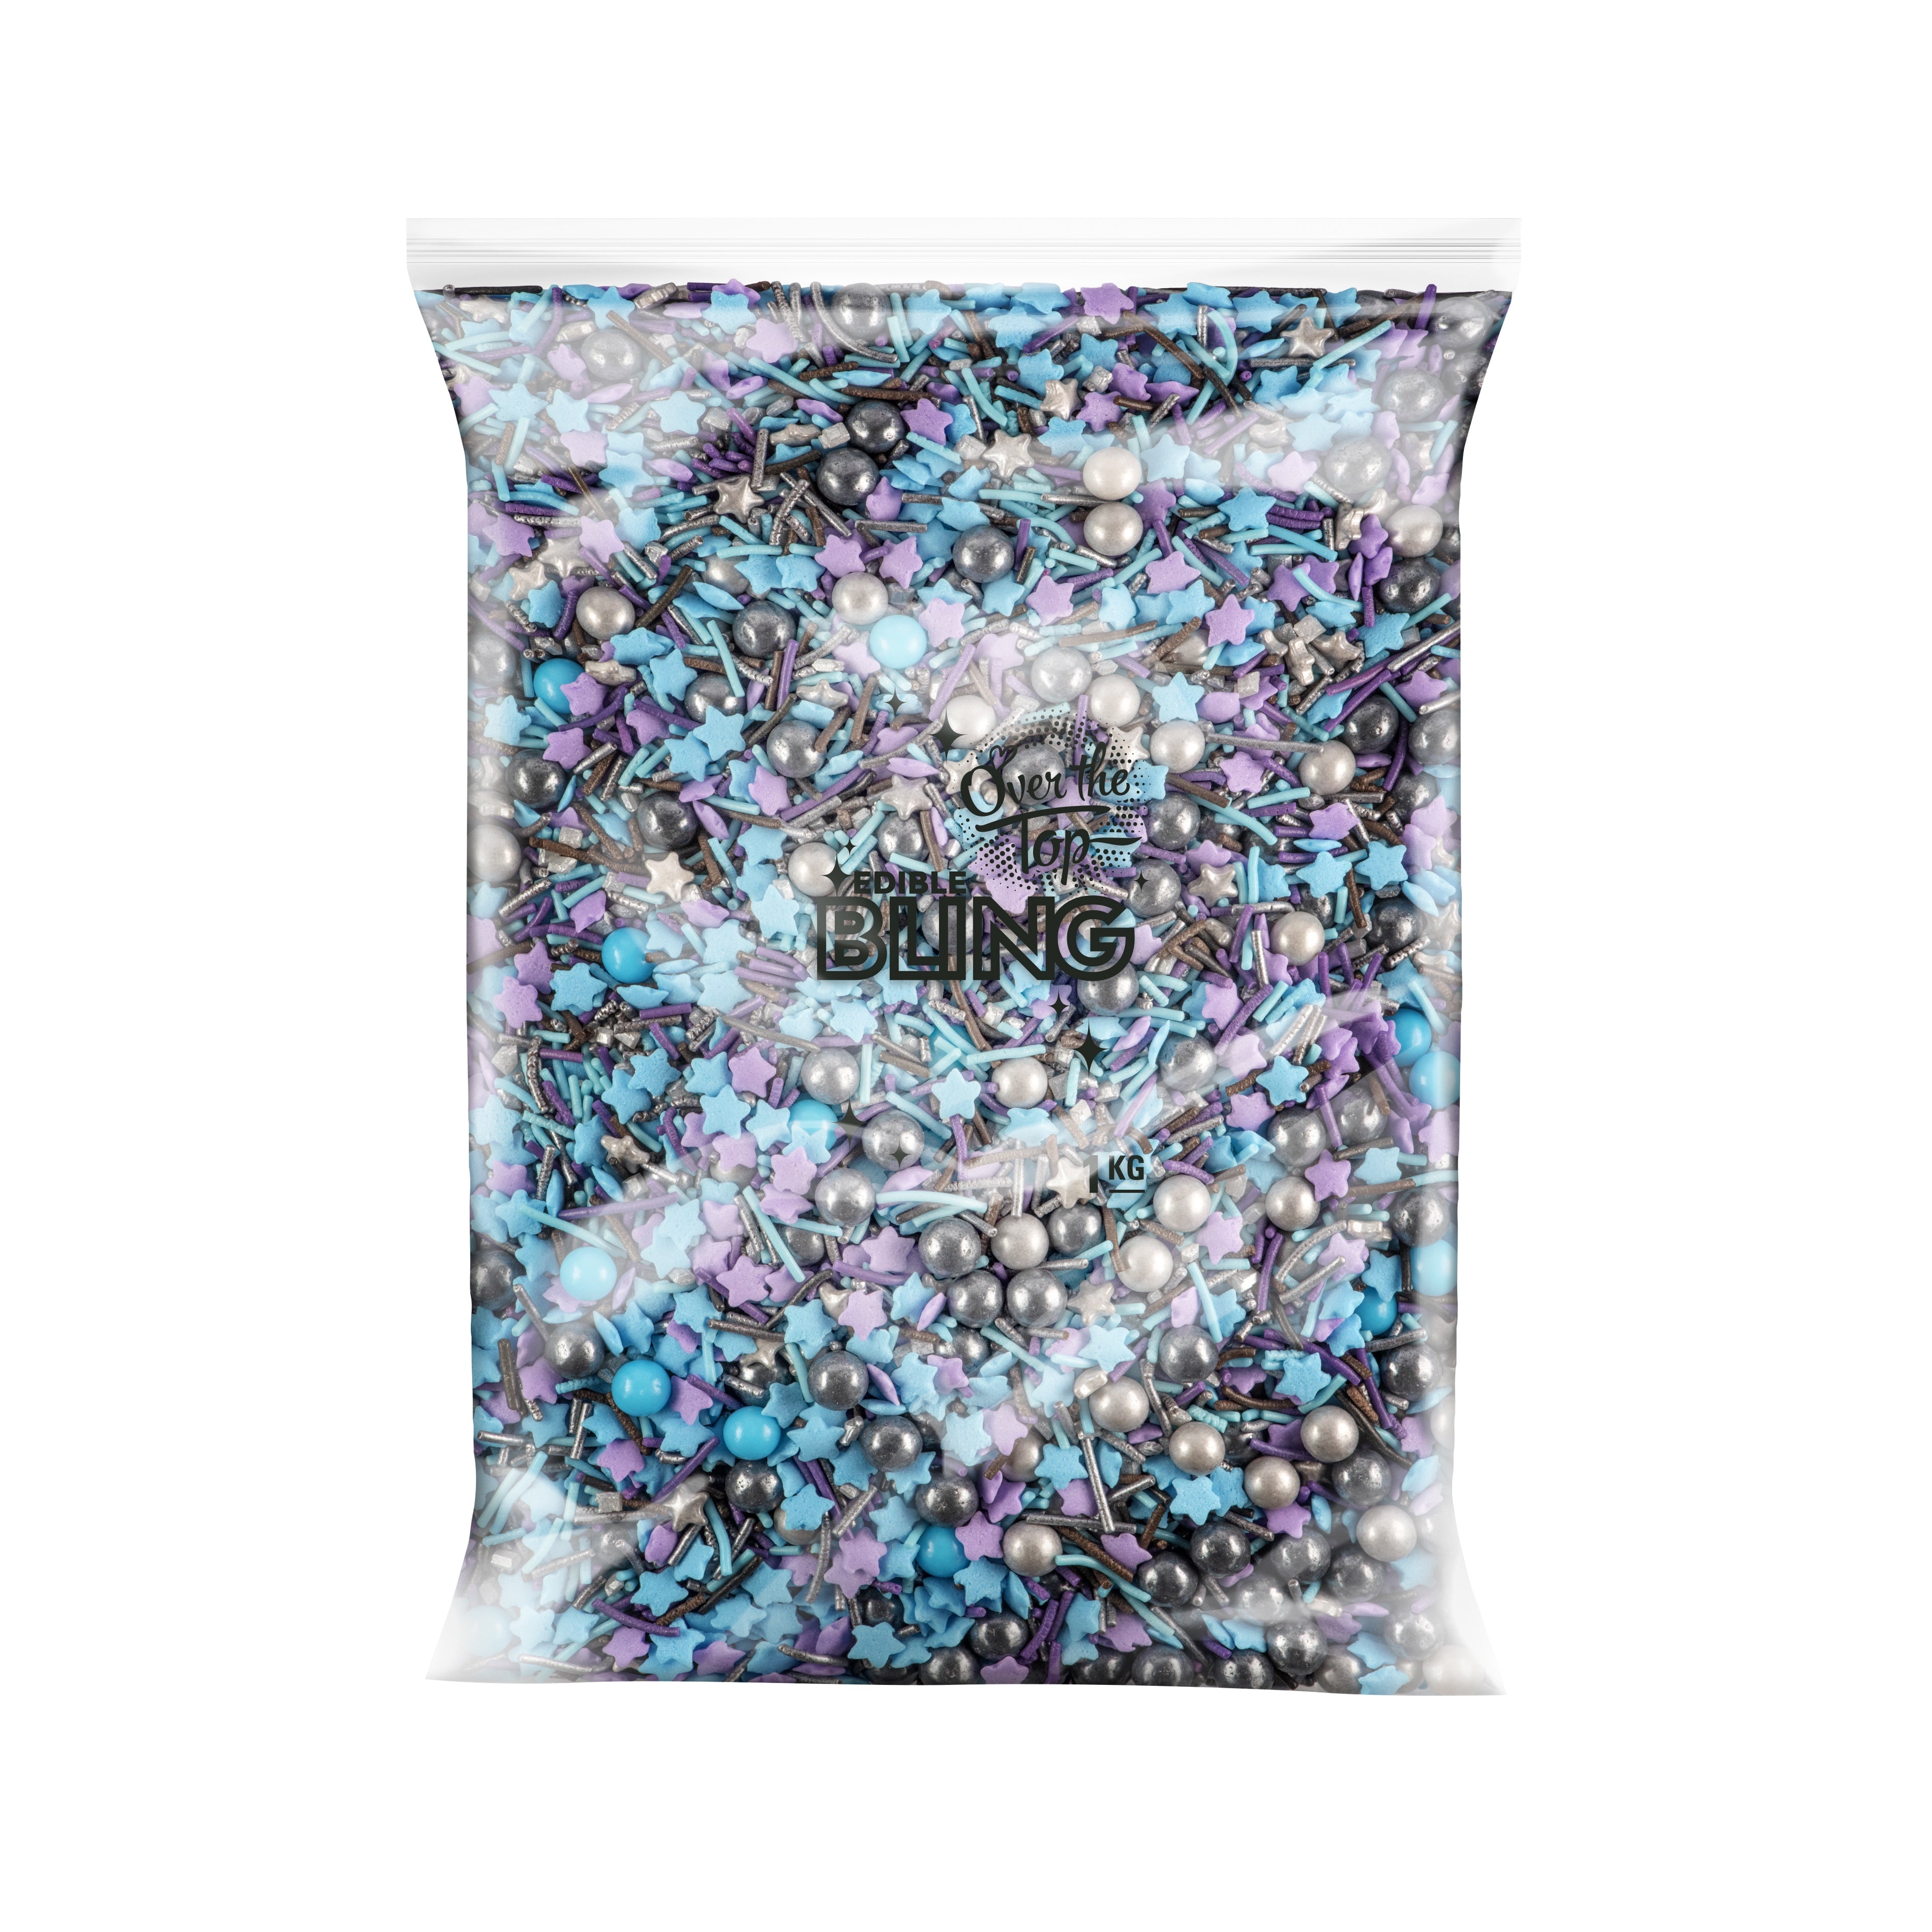 Over The Top Edible Bling Sprinkles - Galaxy Mix Bulk 1kg